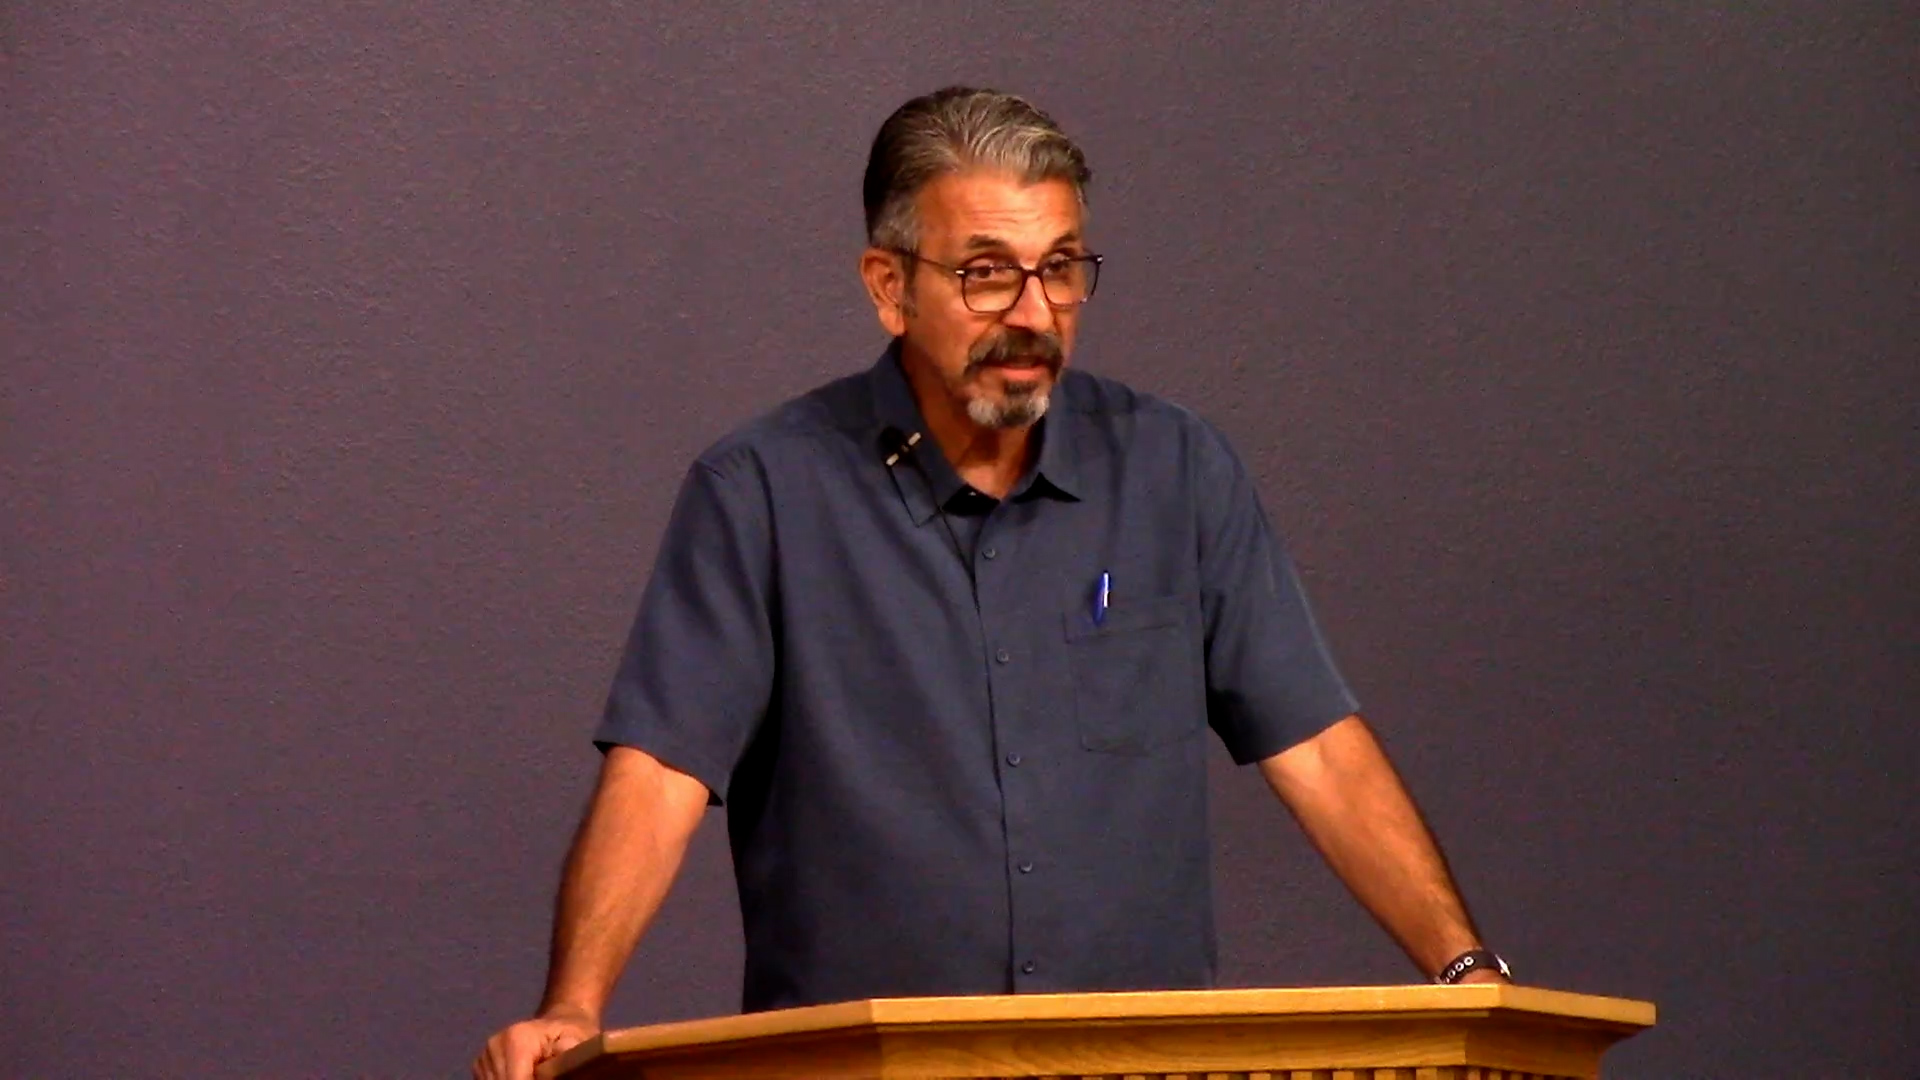 Rick Dominguez teaching 2 Samuel 11:1-5, Riding High In April And Shot Down In May